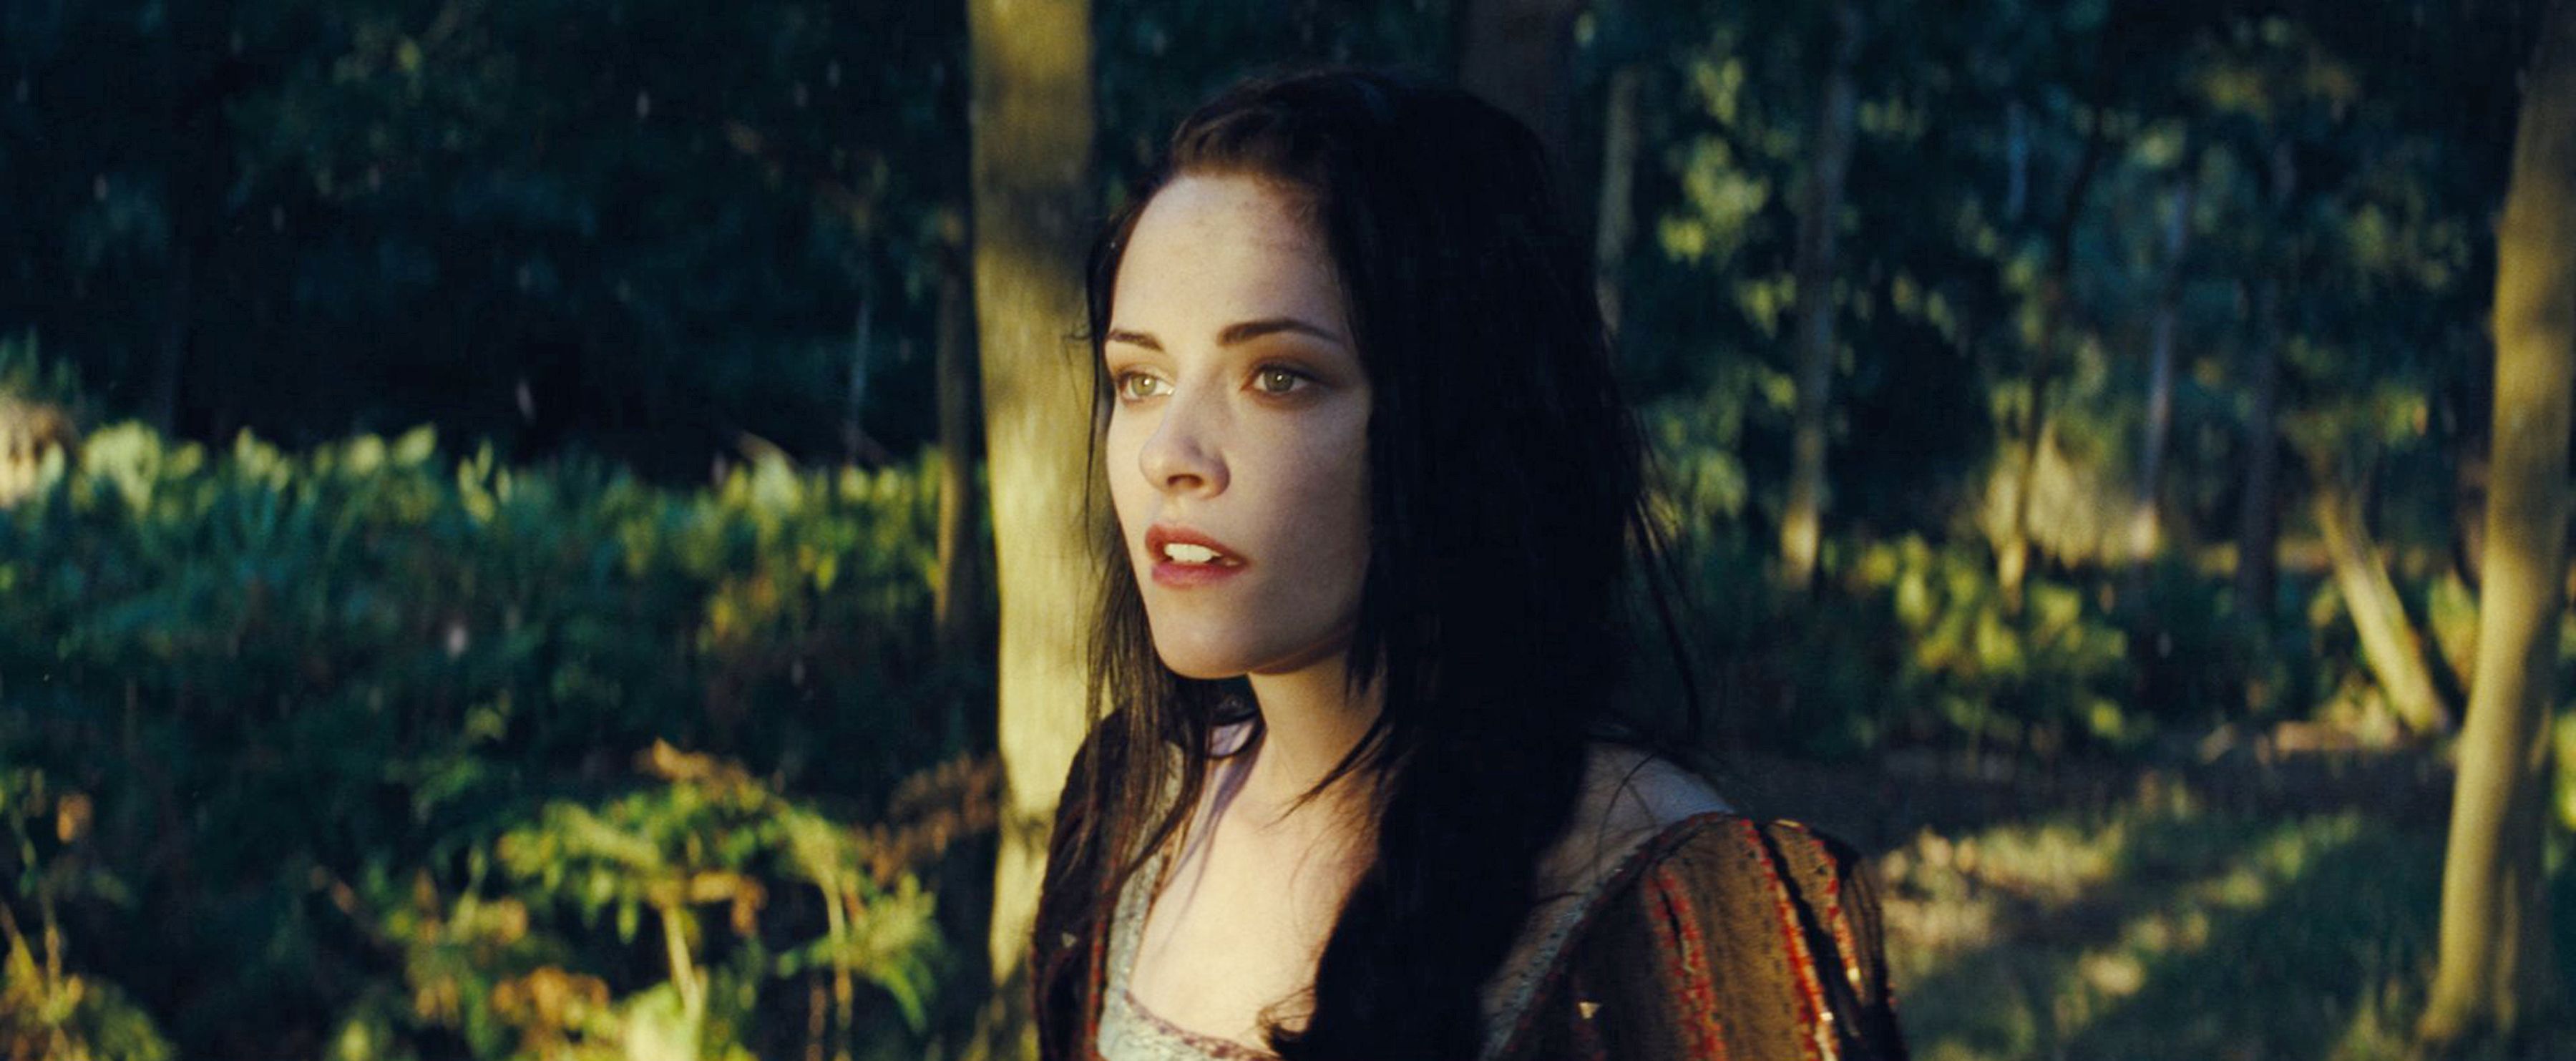 Snow White and the Huntsman Photo #3